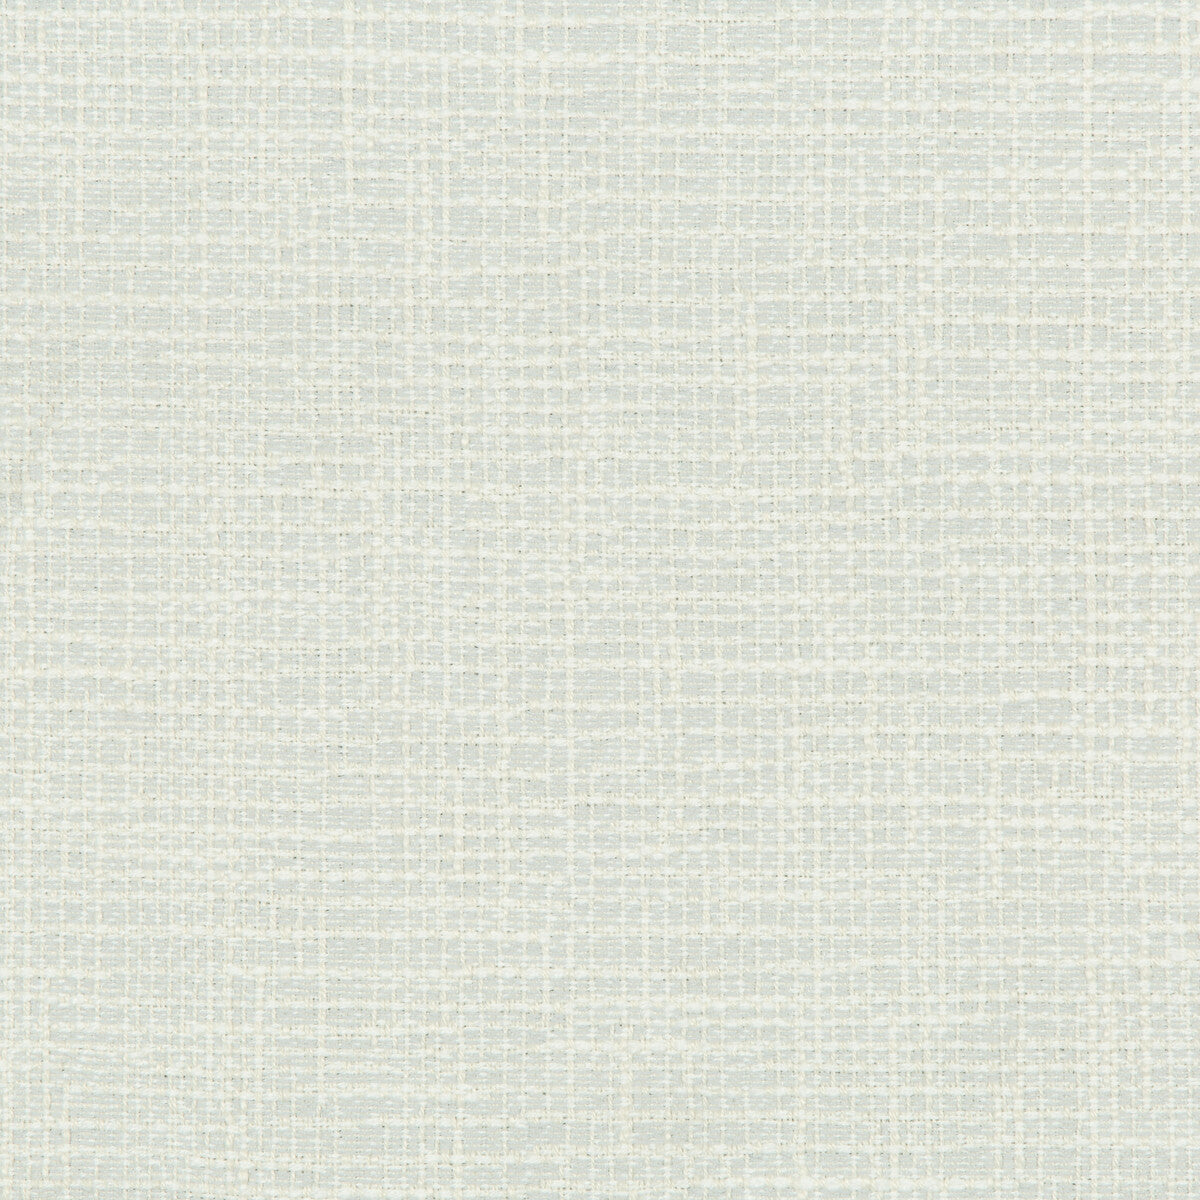 Kravet Design fabric in 36083-1116 color - pattern 36083.1116.0 - by Kravet Design in the Inside Out Performance Fabrics collection